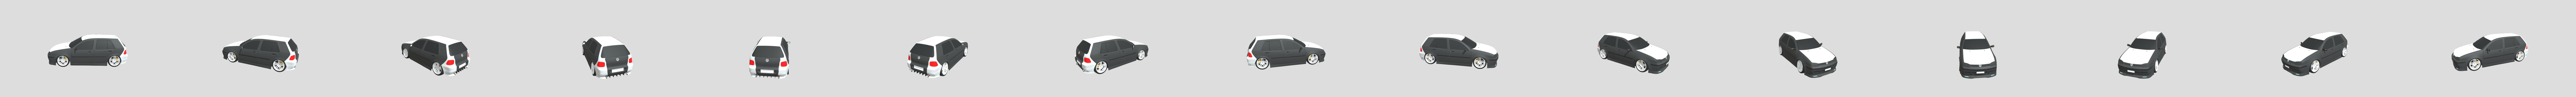 VW Golf4 Tuning 2021, 3D CAD Model Library